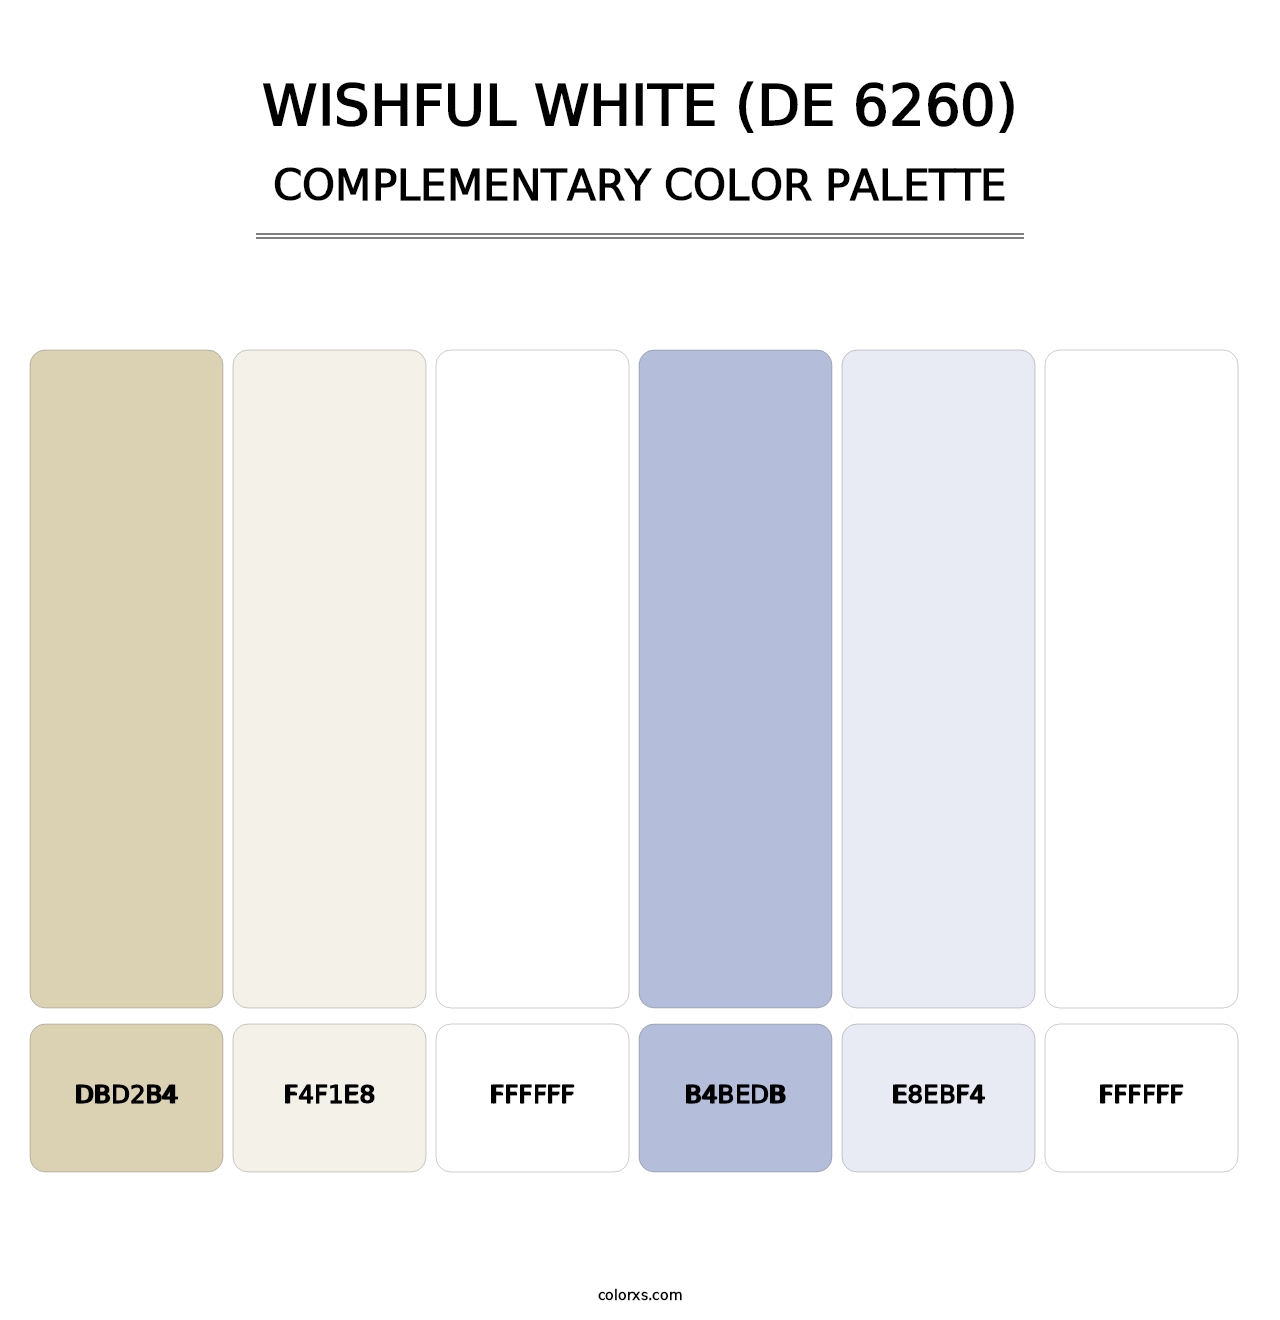 Wishful White (DE 6260) - Complementary Color Palette